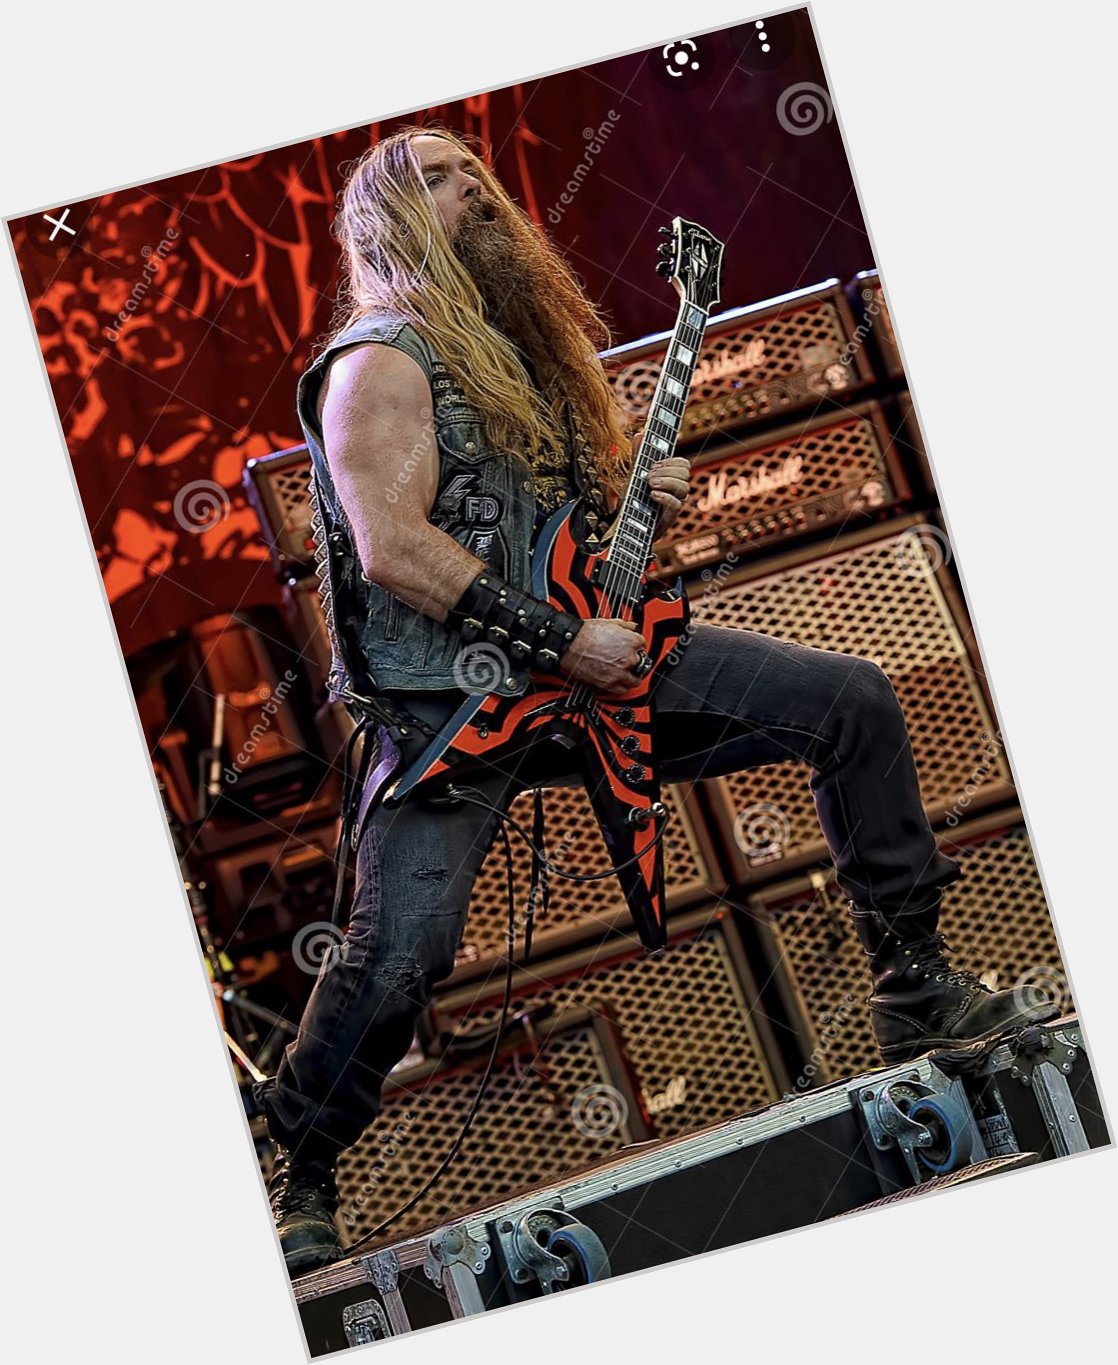 Happy Birthday to the One and only Zakk Wylde    All the best for you   